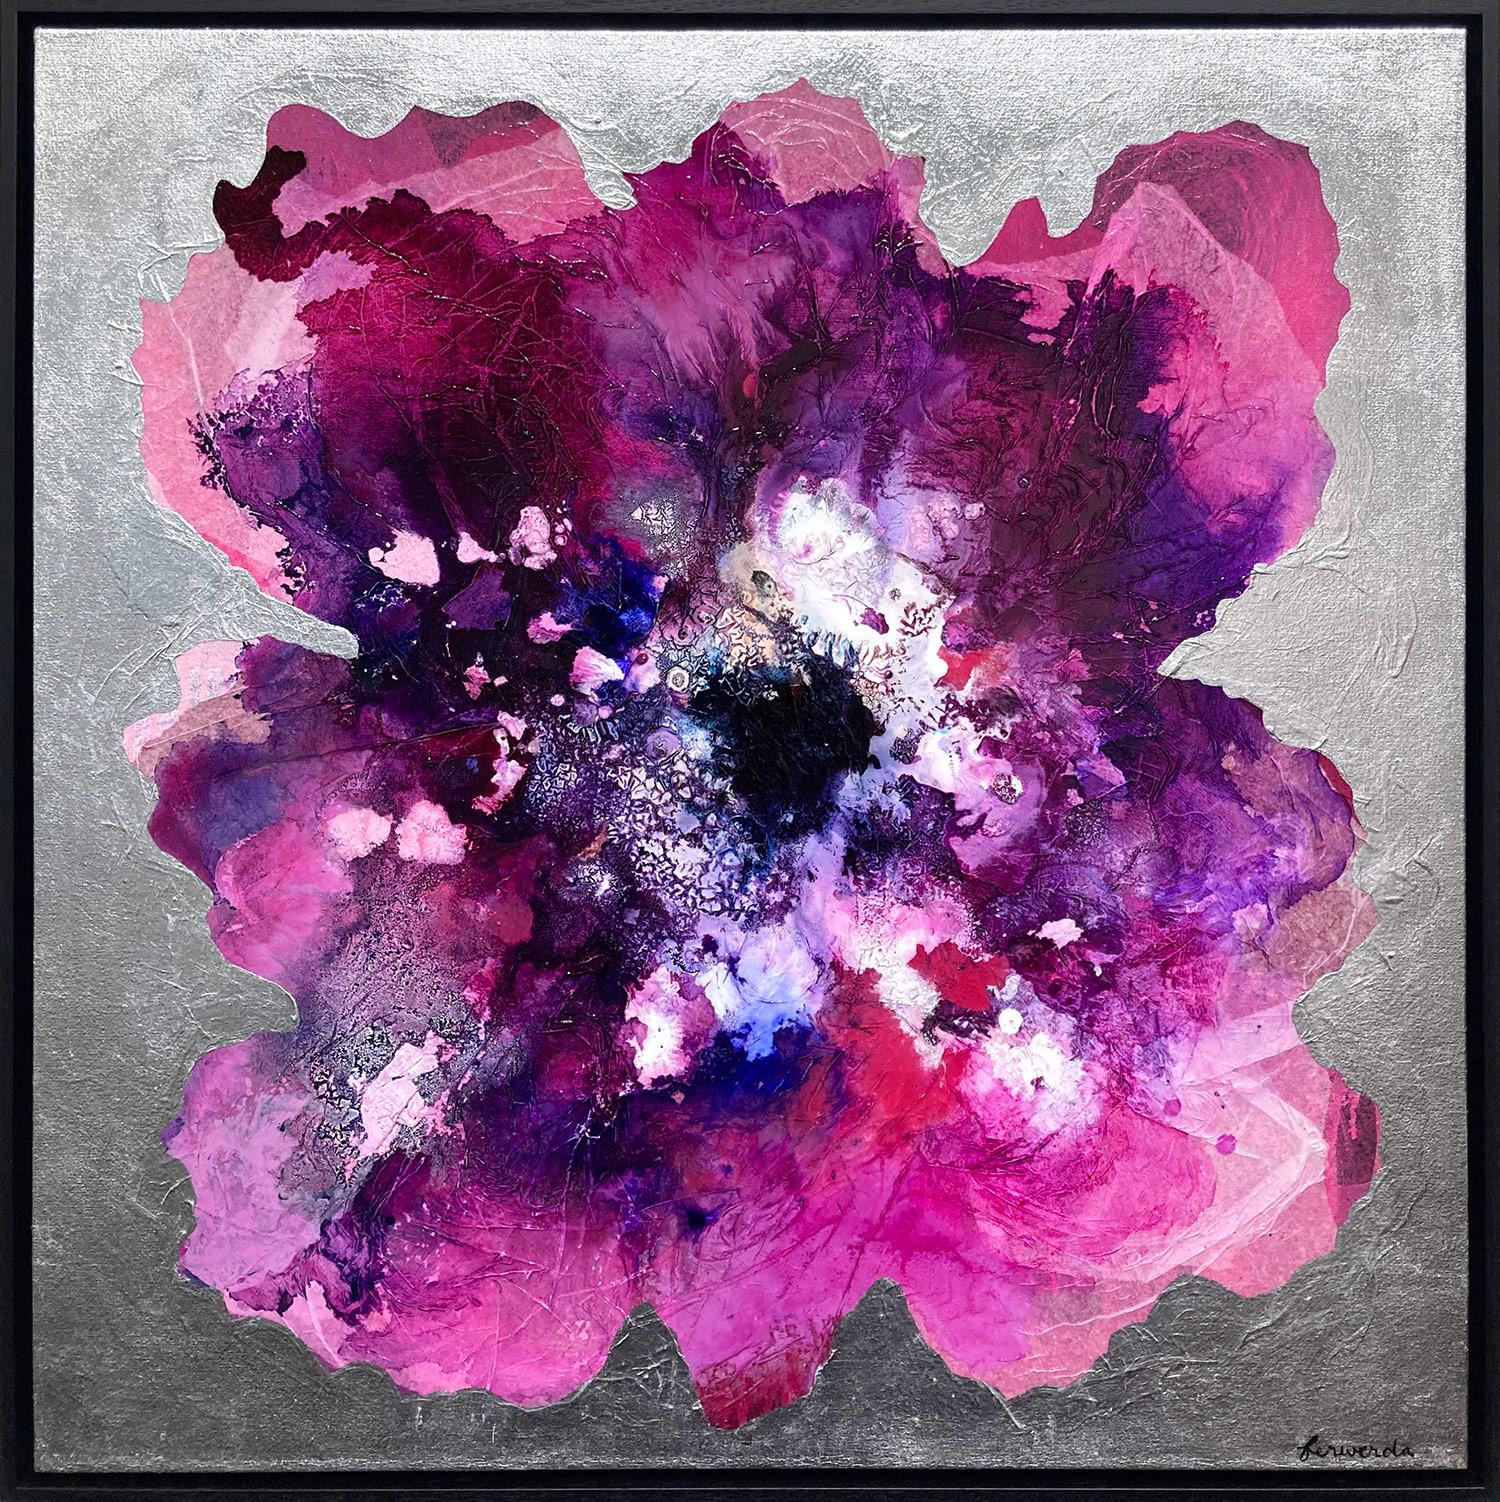 Antoinette Ferwerda Abstract Painting - "Iced Champagne Poppy" Contemporary Mixed Media Floral Painting on Canvas